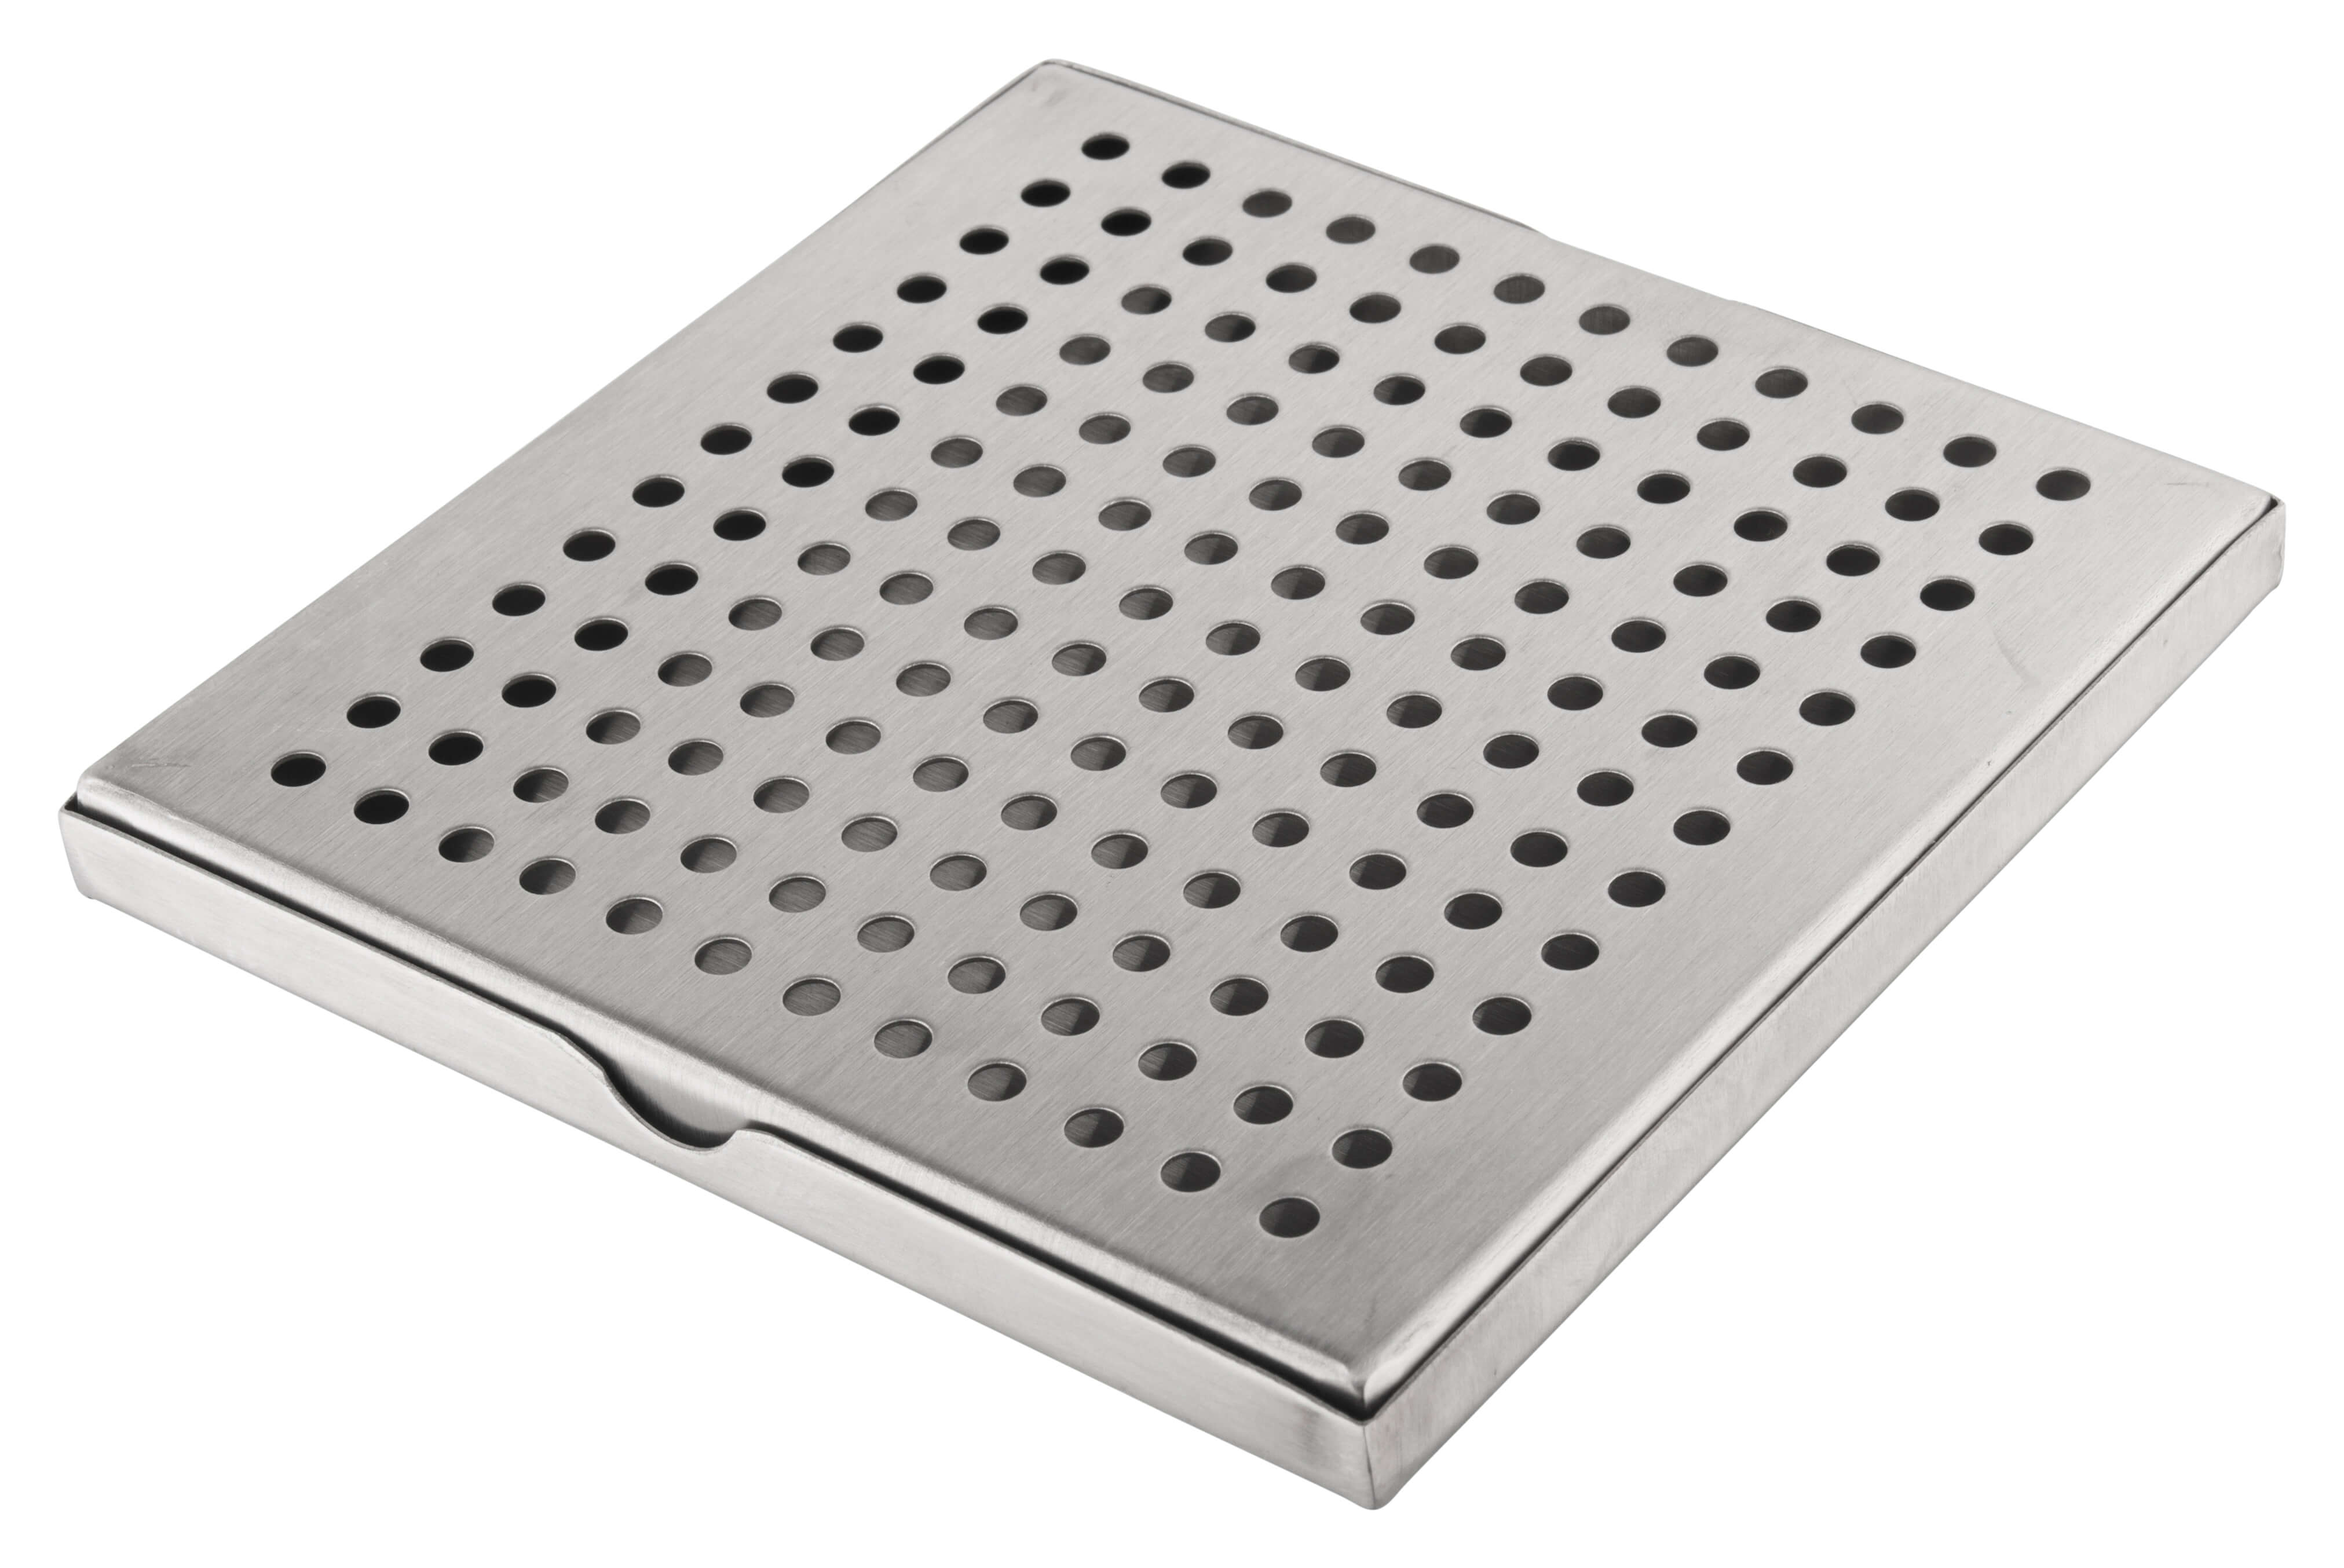 Drip Tray, stainless steel, round perforation, Prime Bar - 14x14x1cm